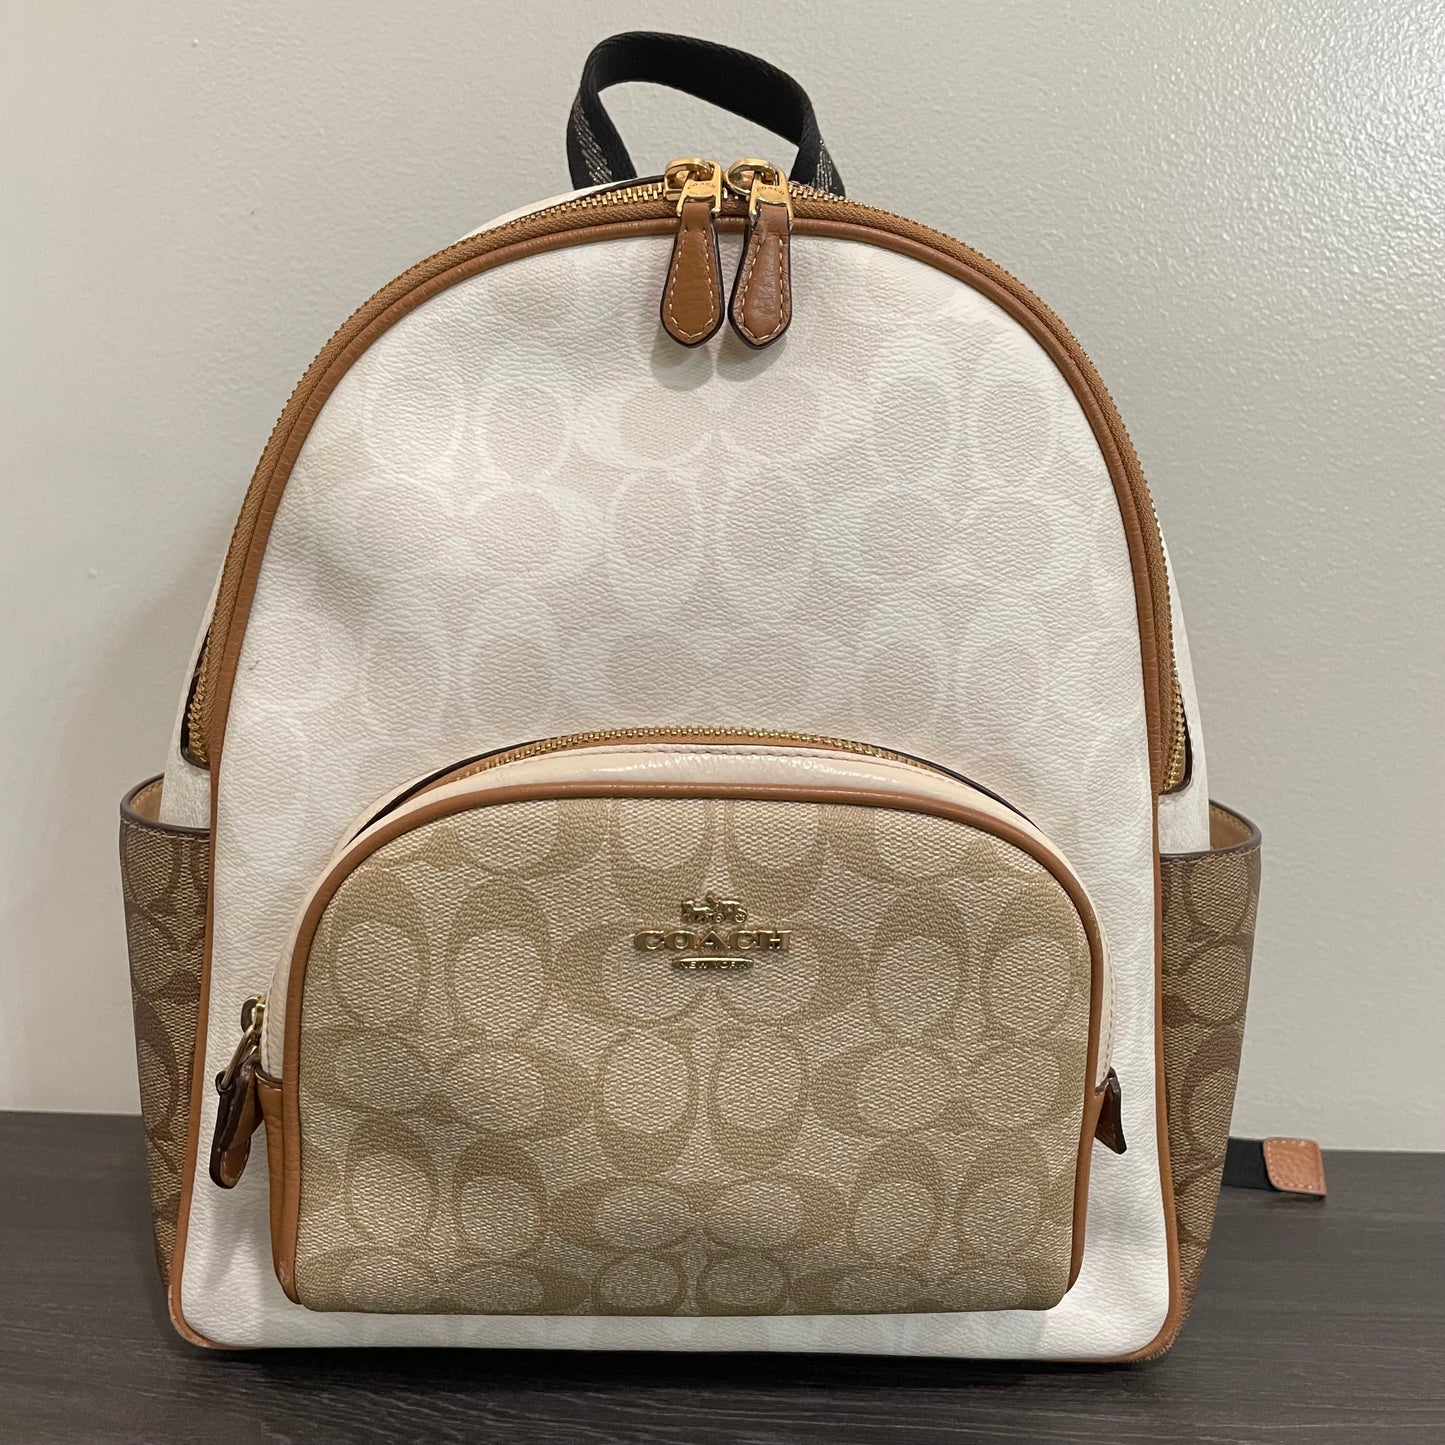 SOLD! Set of 2 Coach Bags